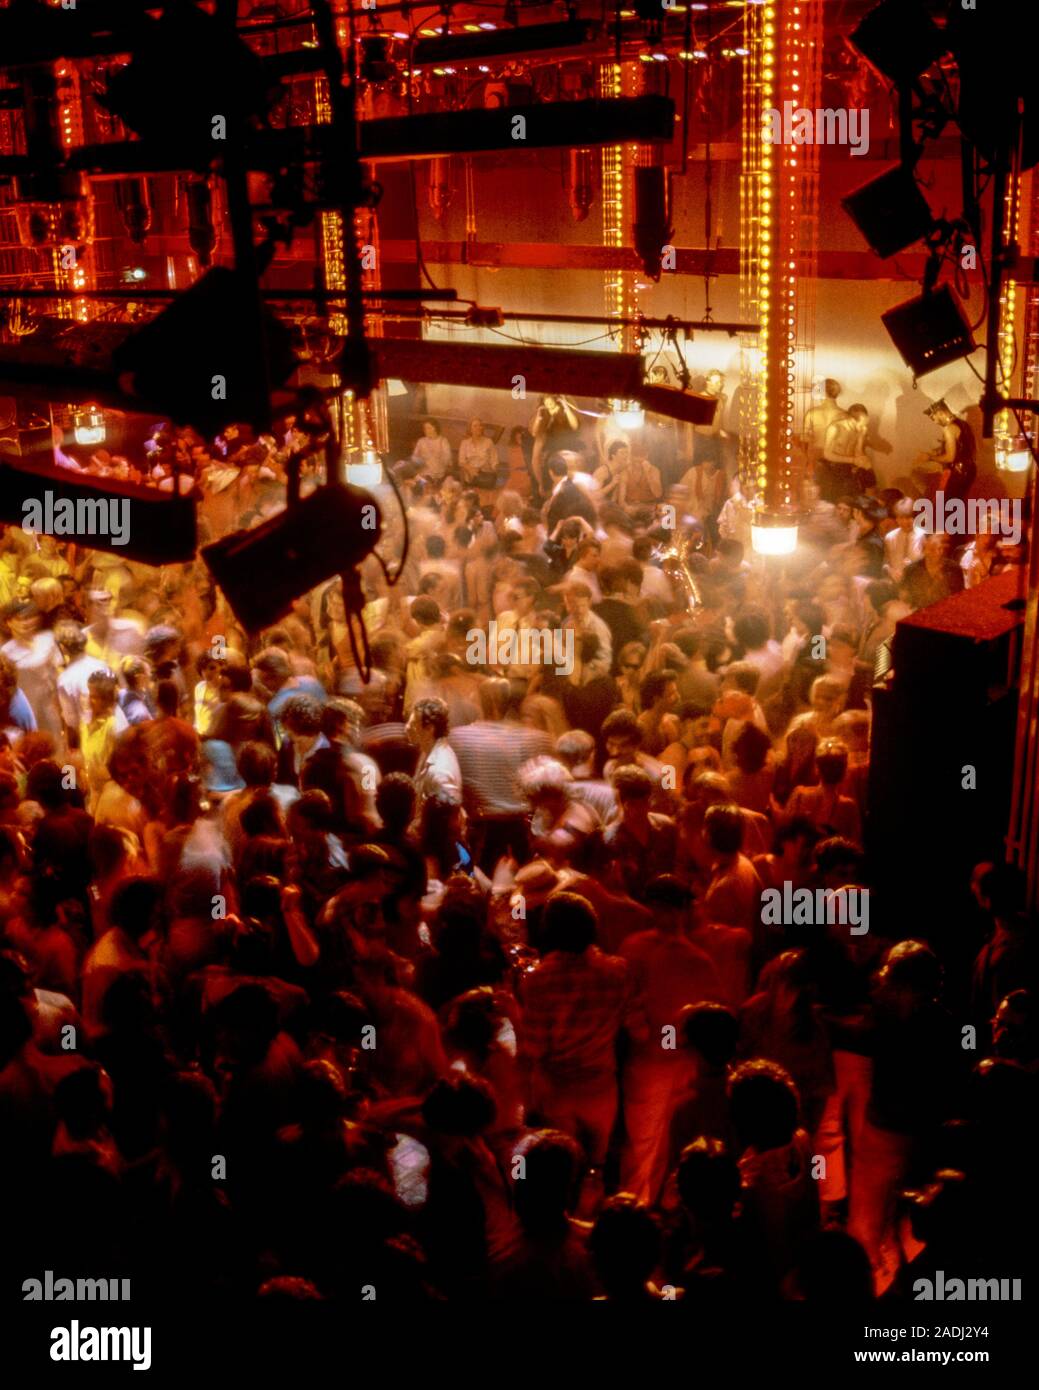 1970s CROWDED DISCO DANCE FLOOR AT STUDIO 54 NEW YORK CITY - kd4041 PHT001 HARS LUXURY UNITED STATES COPY SPACE LADIES MASS PERSONS INSPIRATION UNITED STATES OF AMERICA MALES RISK ENTERTAINMENT SPECTATORS GATHERING HAPPINESS HEAD AND SHOULDERS HIGH ANGLE ADVENTURE RECREATION DANCE FLOOR NYC CONNECTION MOTION BLUR NEW YORK CITIES ESCAPE NEW YORK CITY THEATRICAL CREATIVITY EXCITING RELAXATION THRONG TOGETHERNESS ATTENDANCE OLD FASHIONED Stock Photo